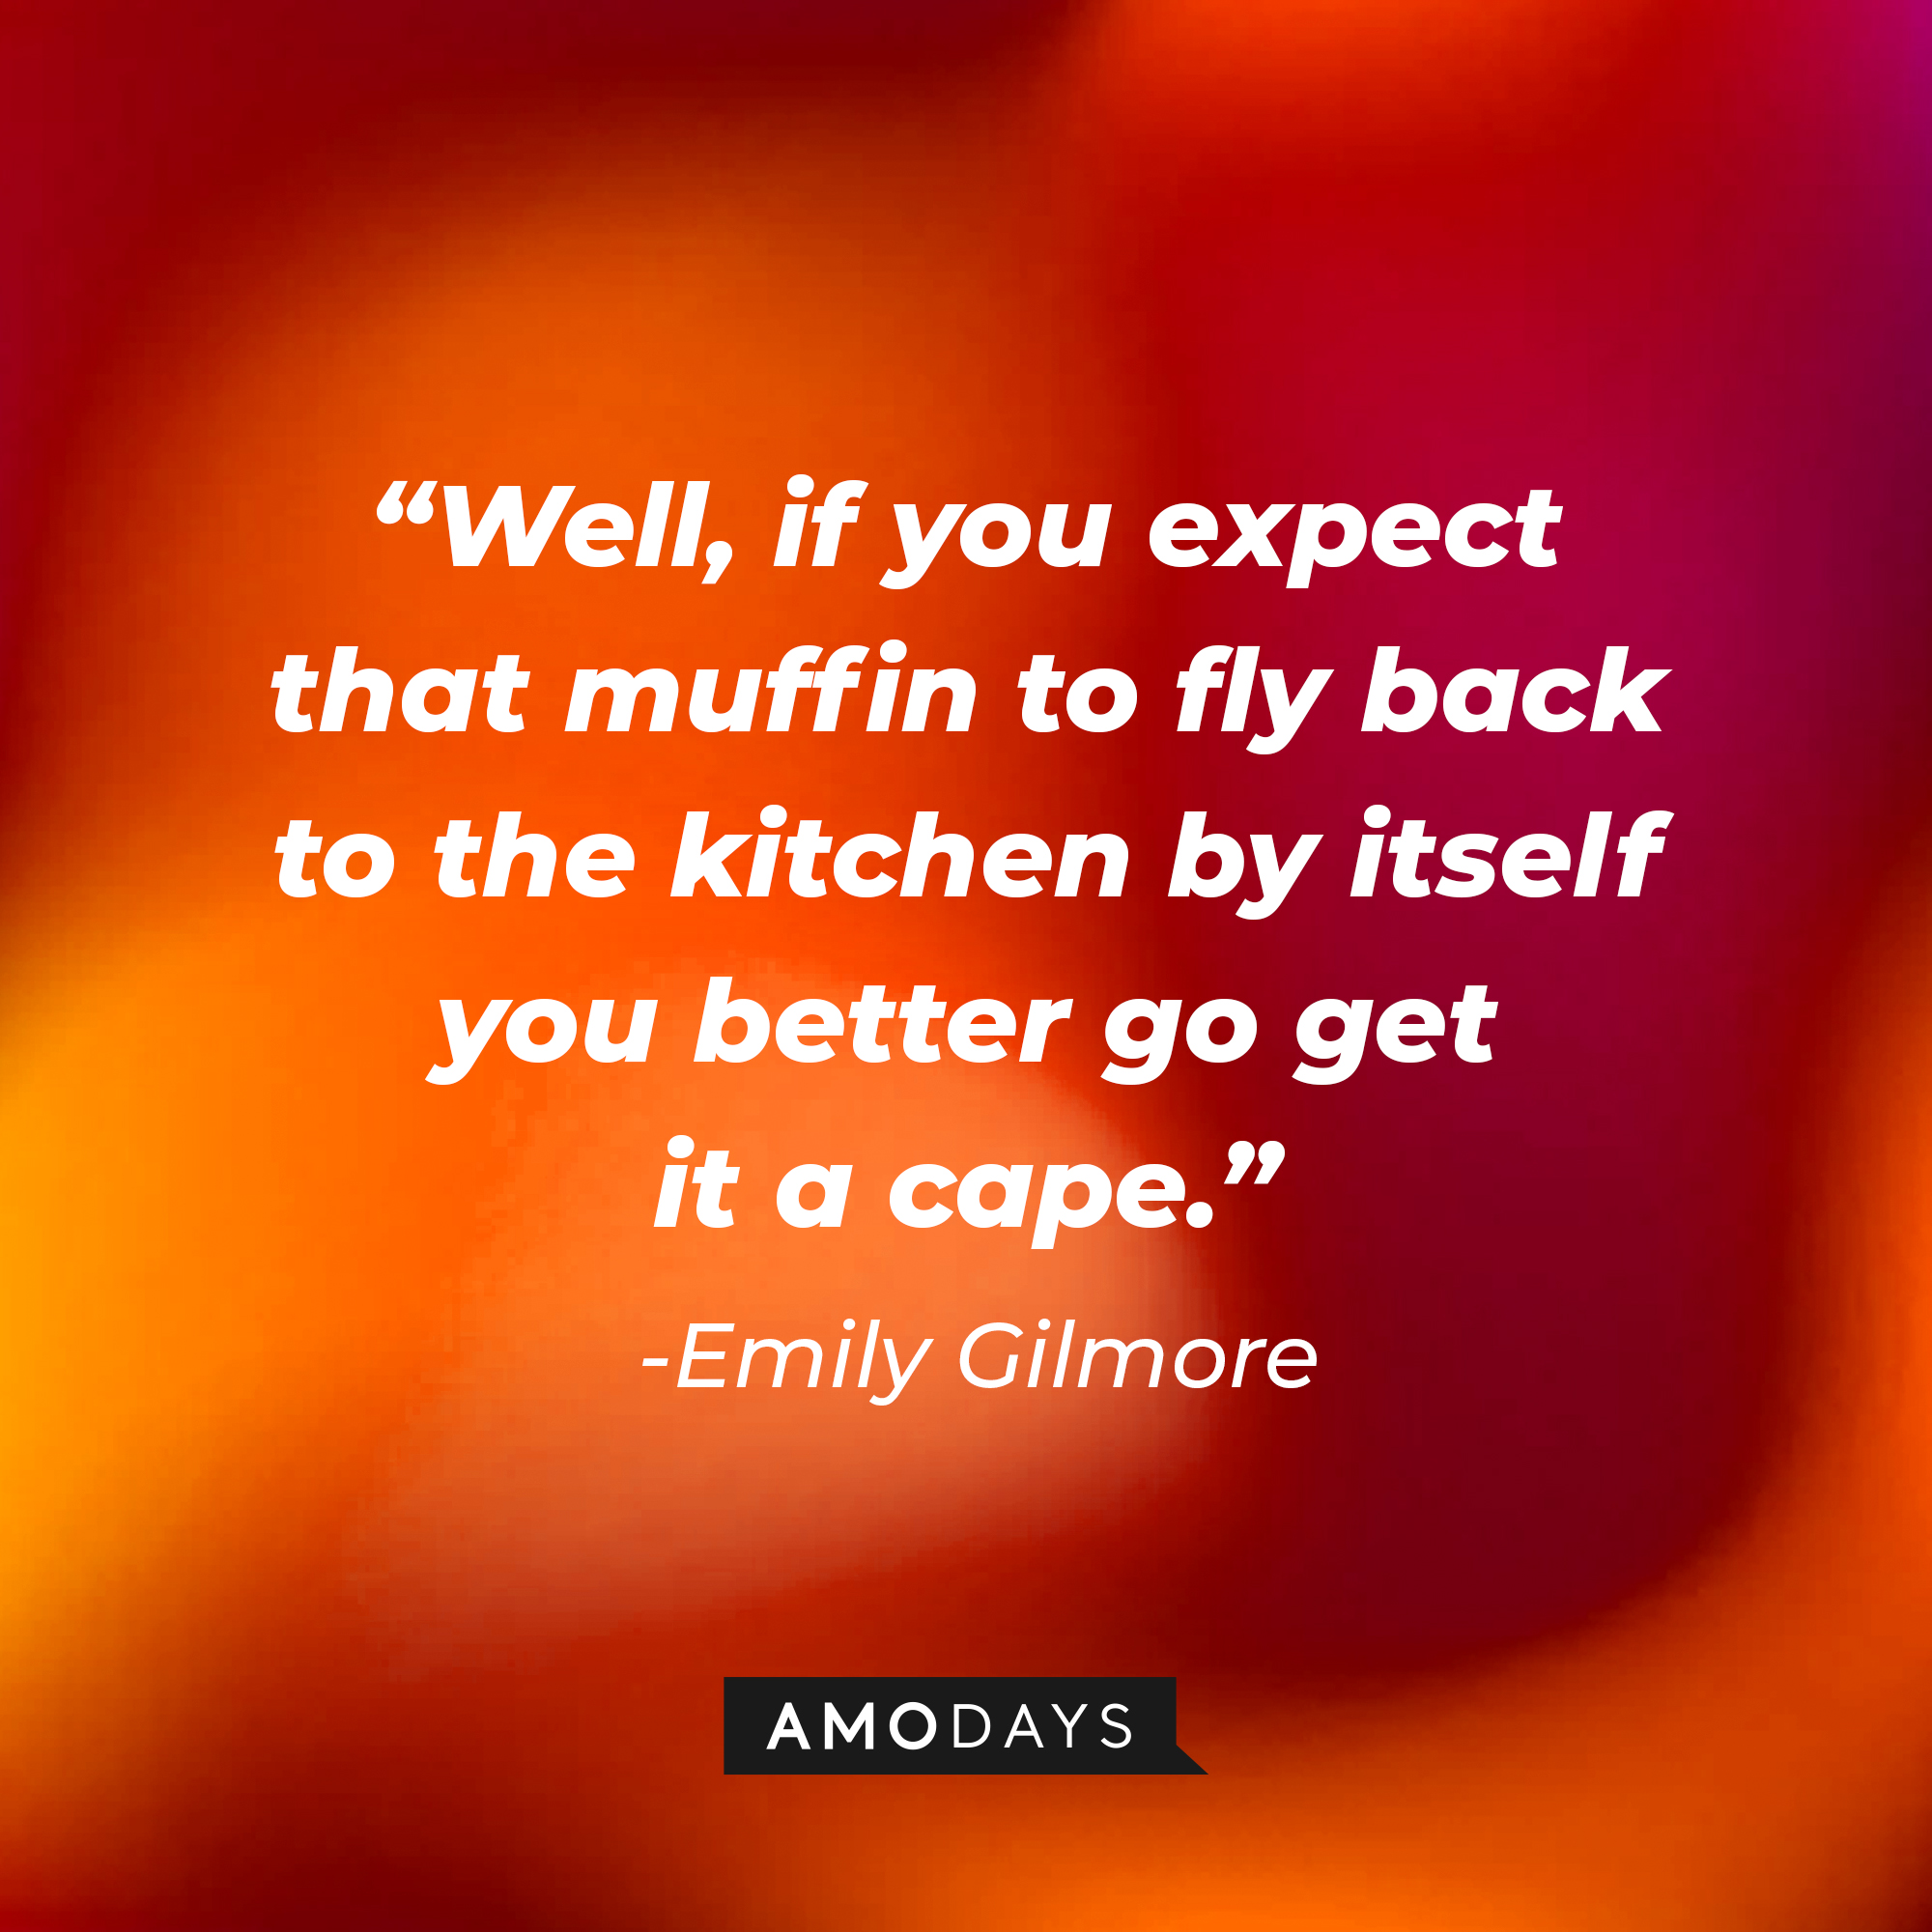 Emily Gilmore's quote: "Well, if you expect that muffin to fly back to the kitchen by itself you better go get it a cape." | Source: Amodays